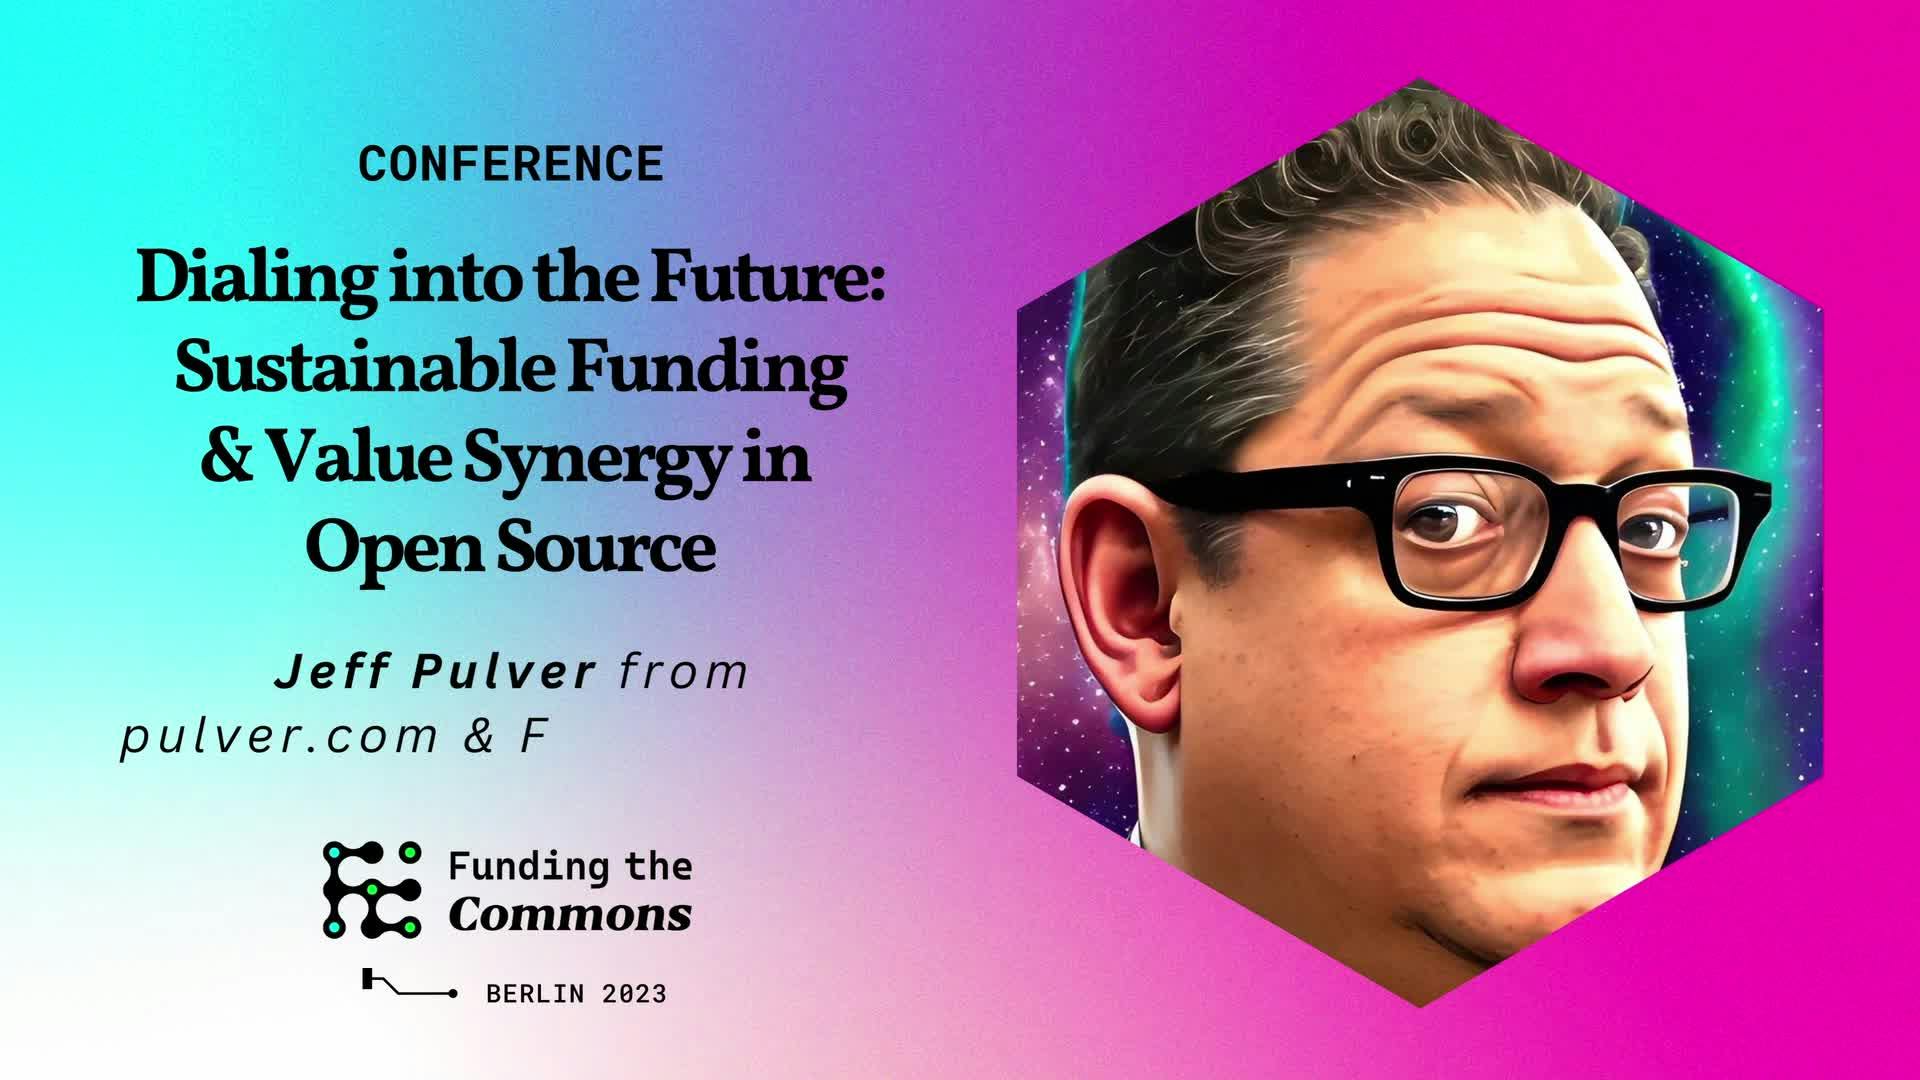 Dialing into the Future: Sustainable Funding & Value Synergy in Open Source